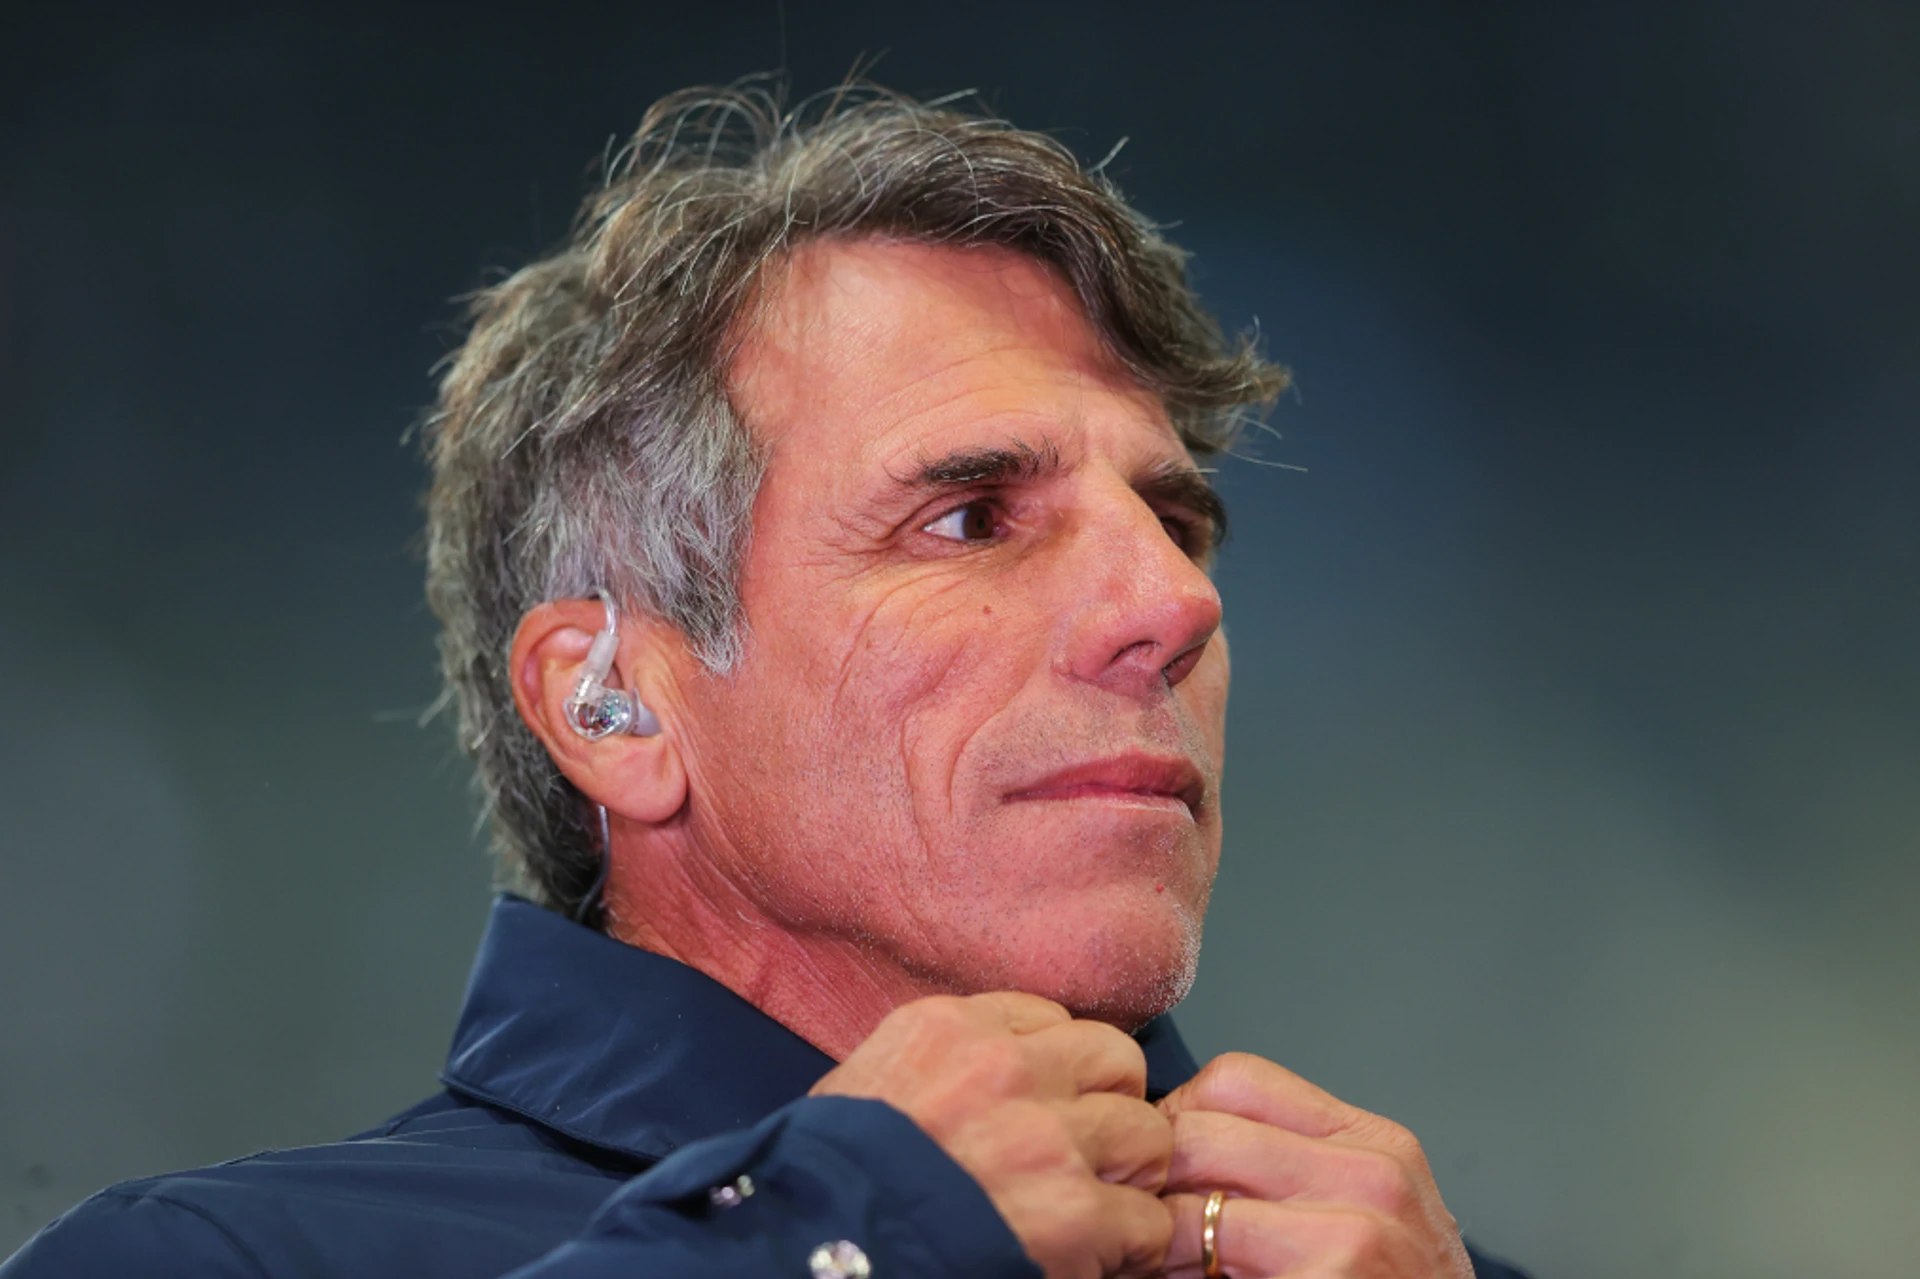 Euro 2024 Vodcast - Gianfranco Zola: A Legacy in Football